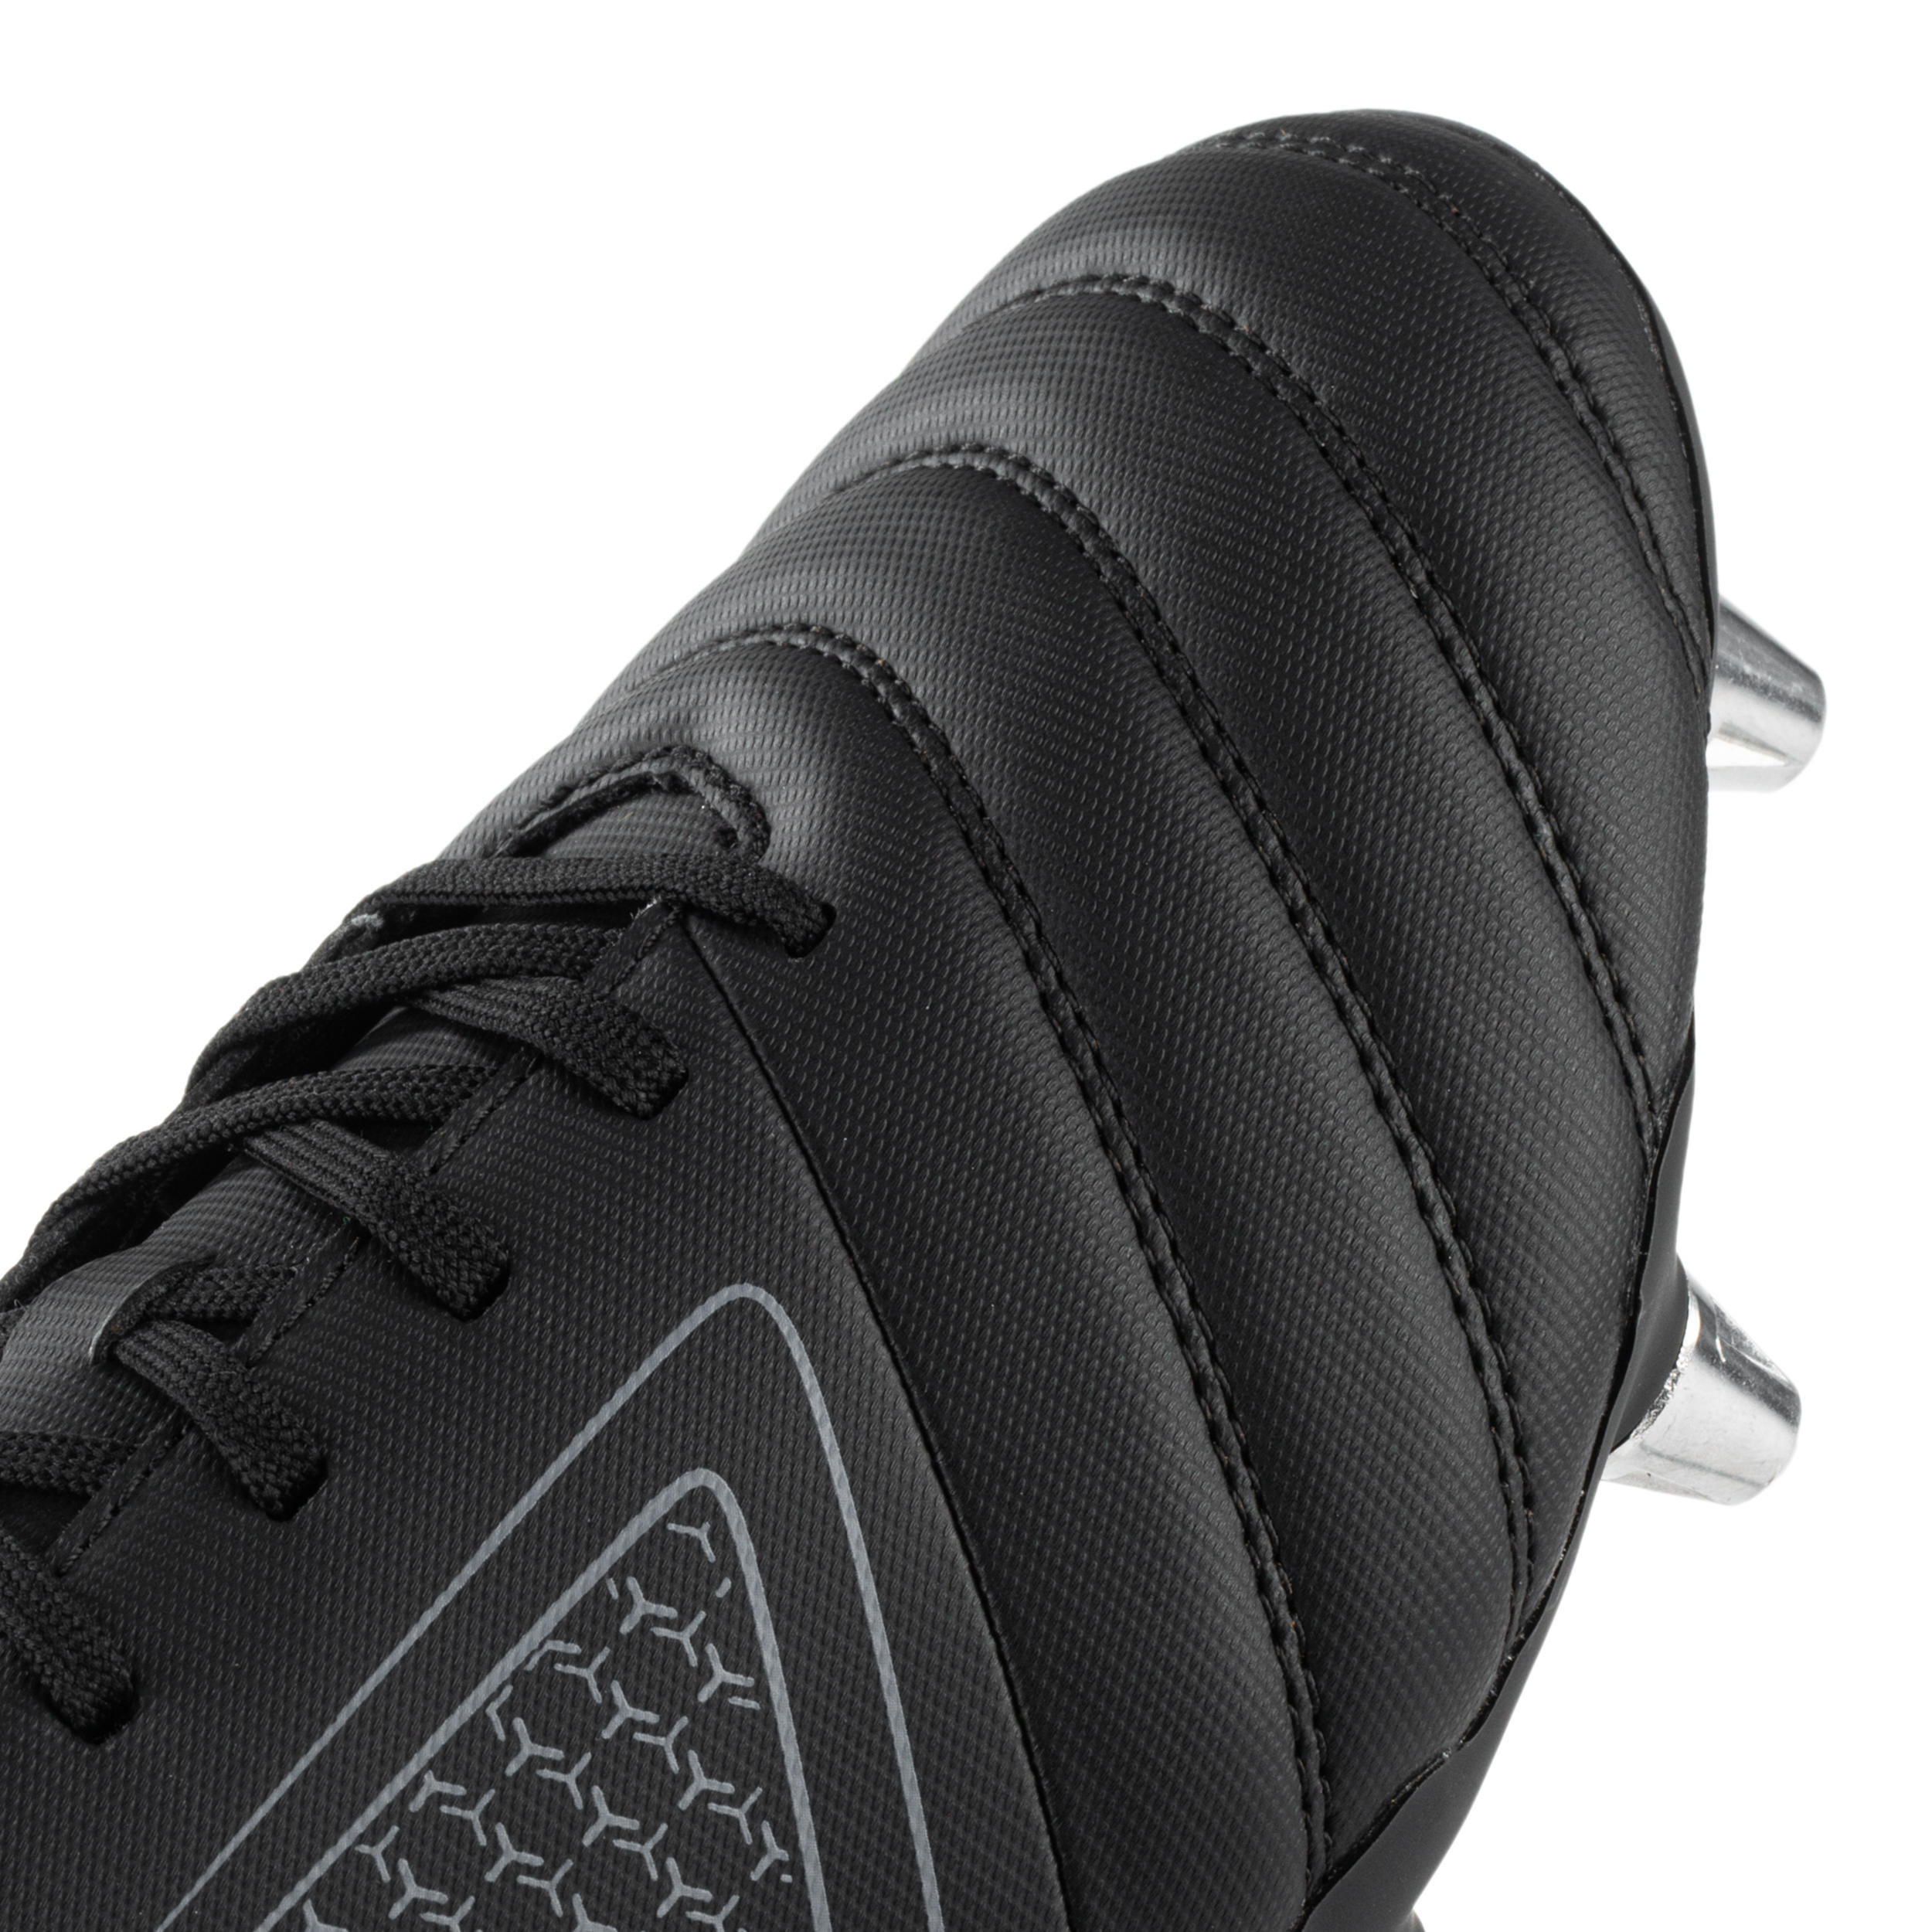 Adult Soft Ground Screw-In Rugby Boots Impact R100 SG 8 Studs - Black 6/8